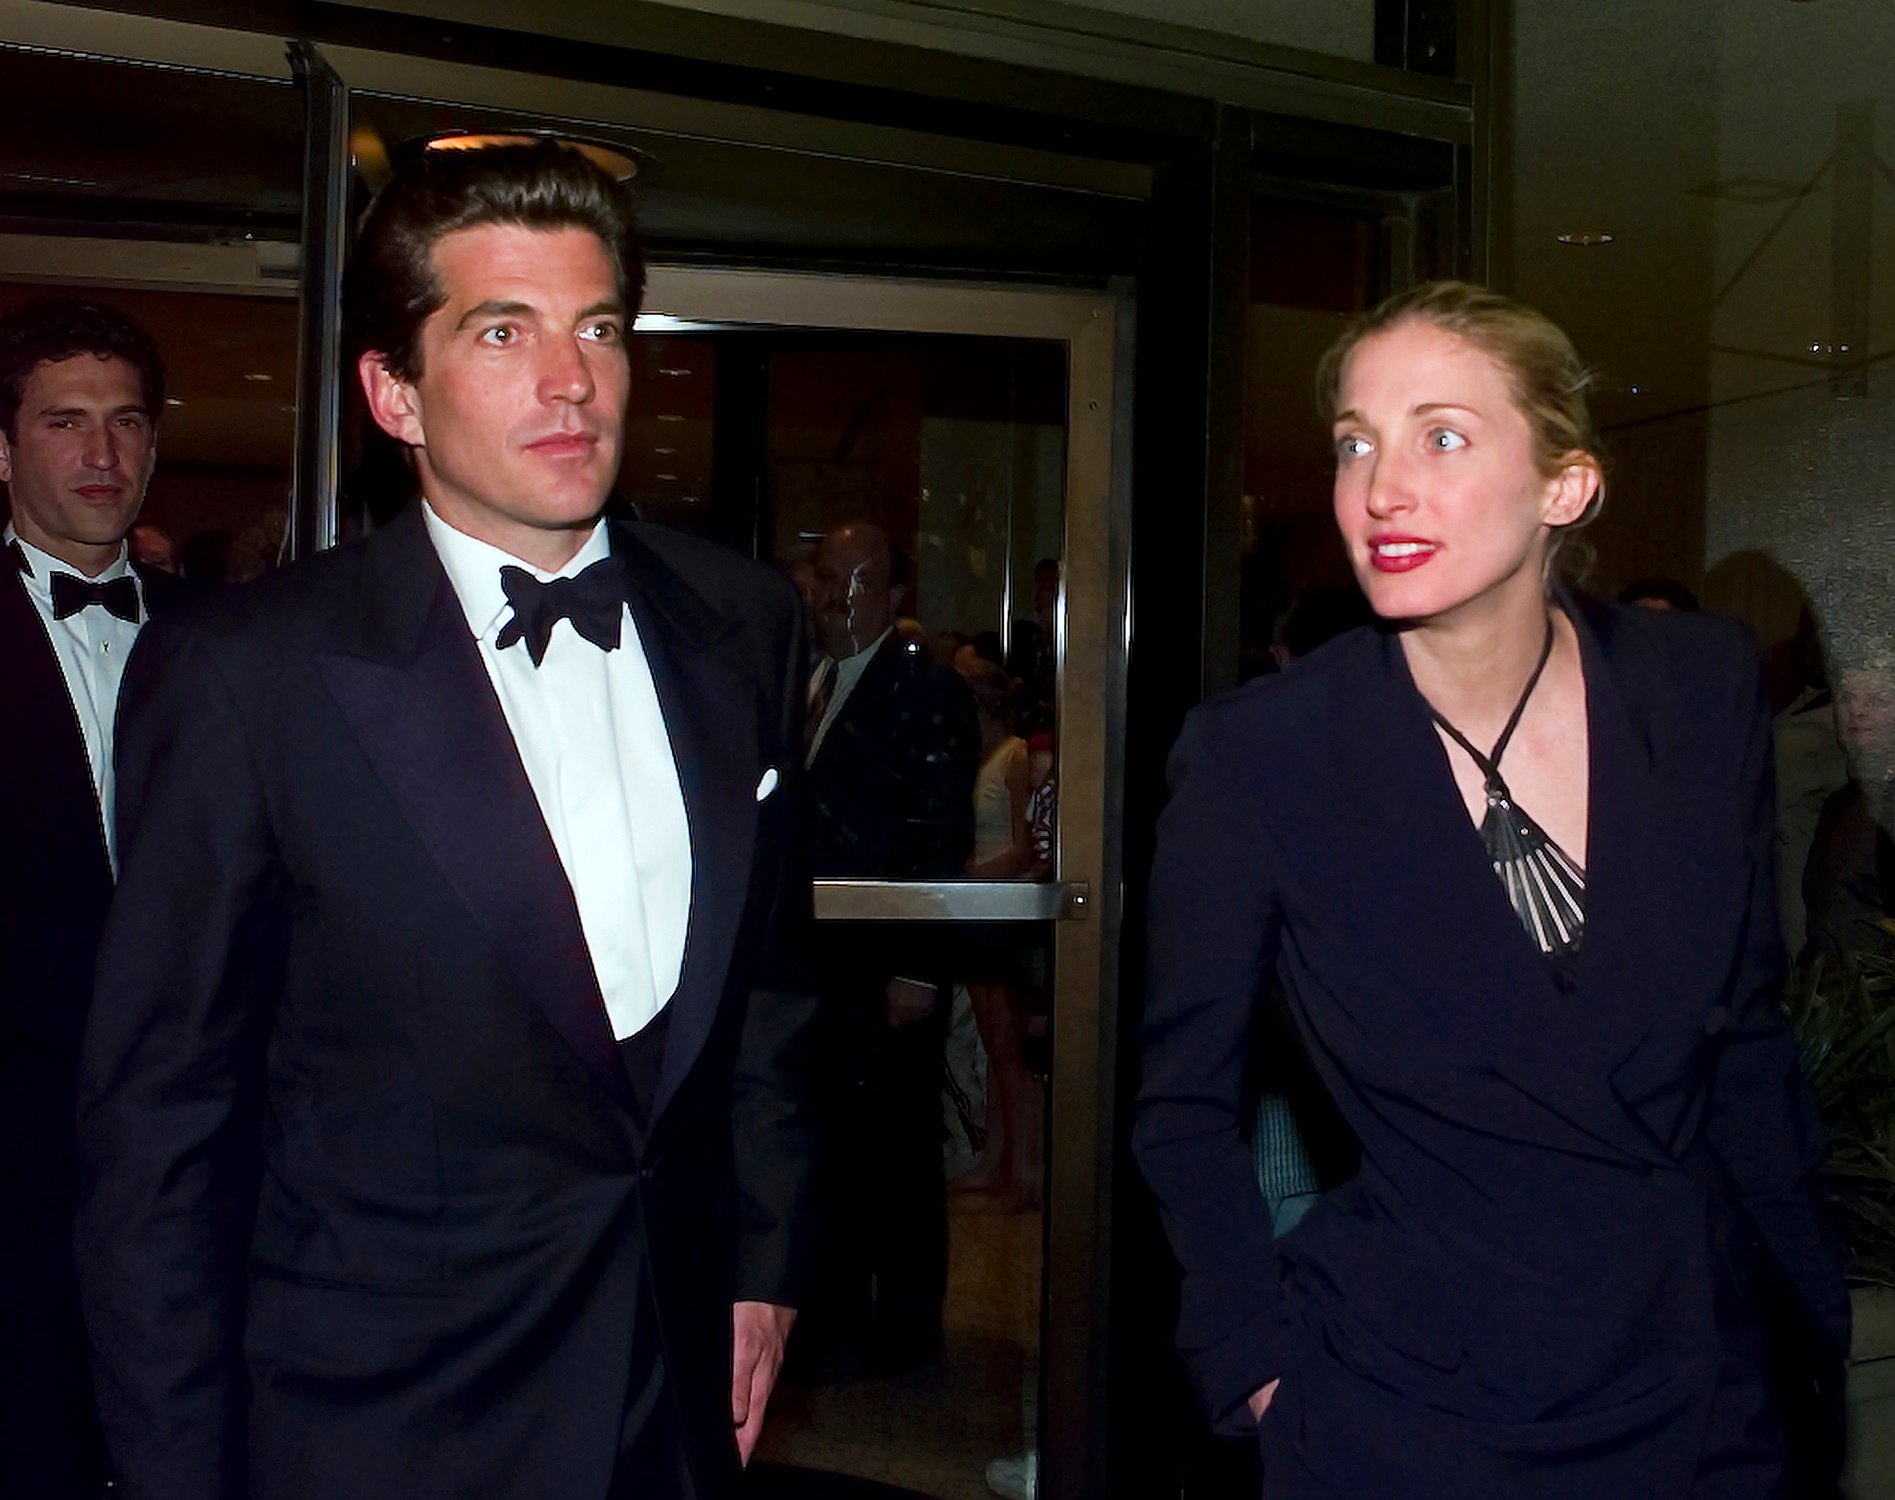 John F. Kennedy Jr. and Carolyn Bessette-Kennedy leaving the White House Correspondents' Dinner in May 1999